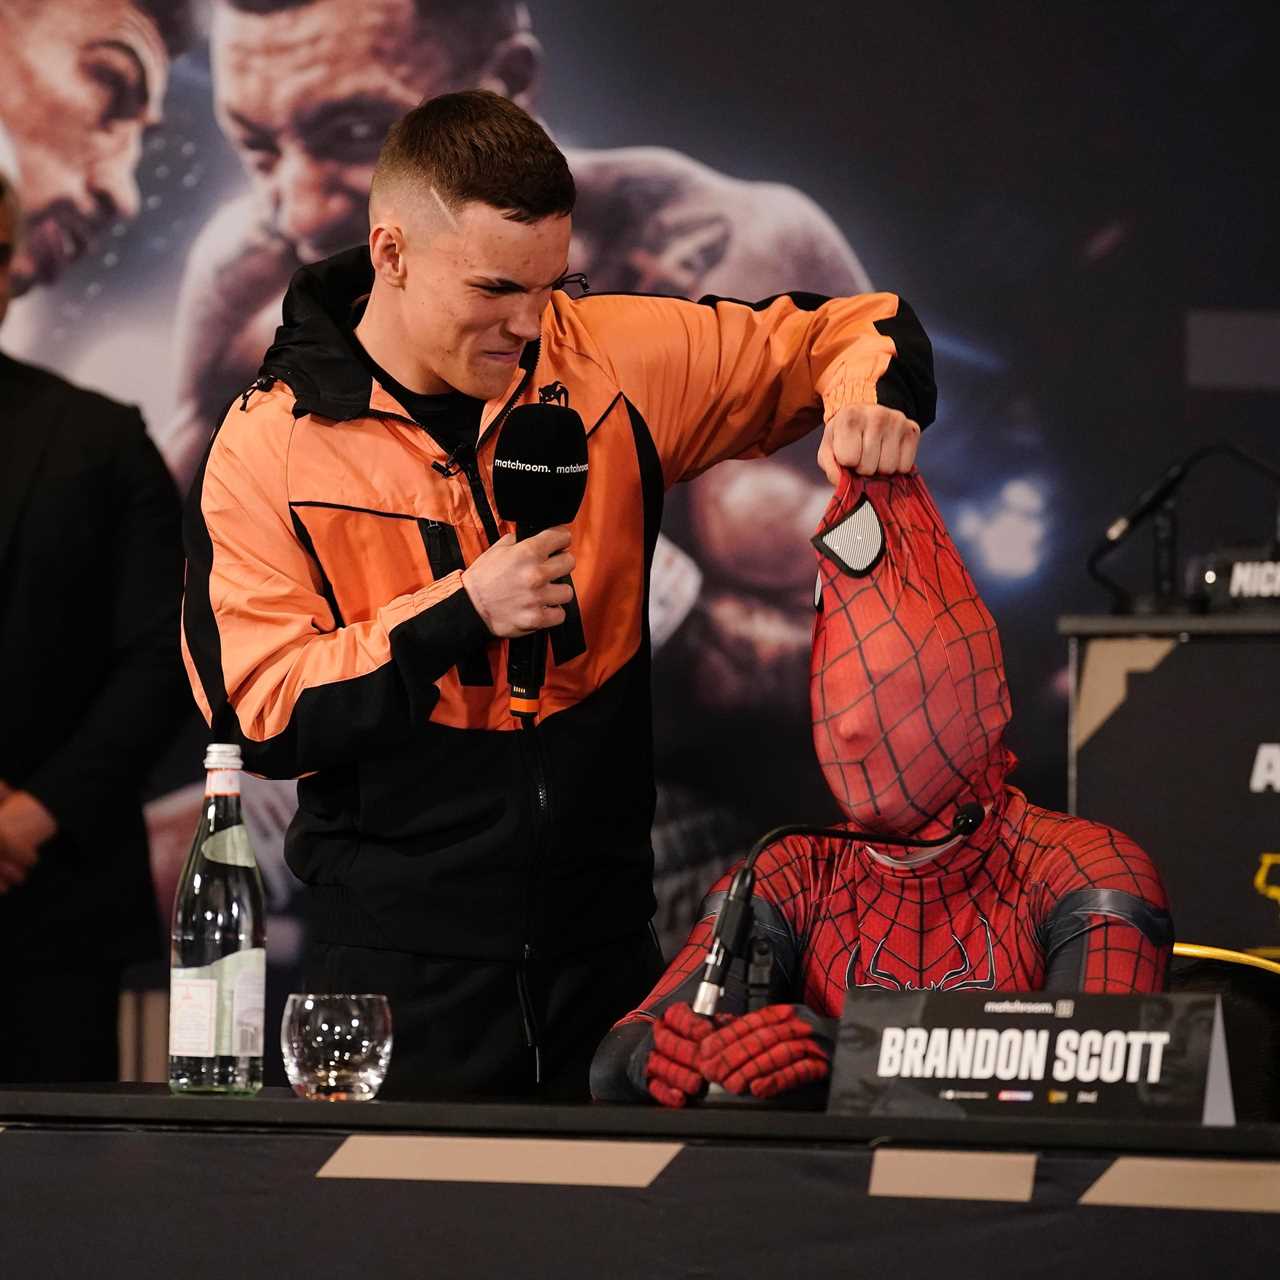 Eddie Hearn is left confused as 'Spider-Man,' unmasked during a press conference